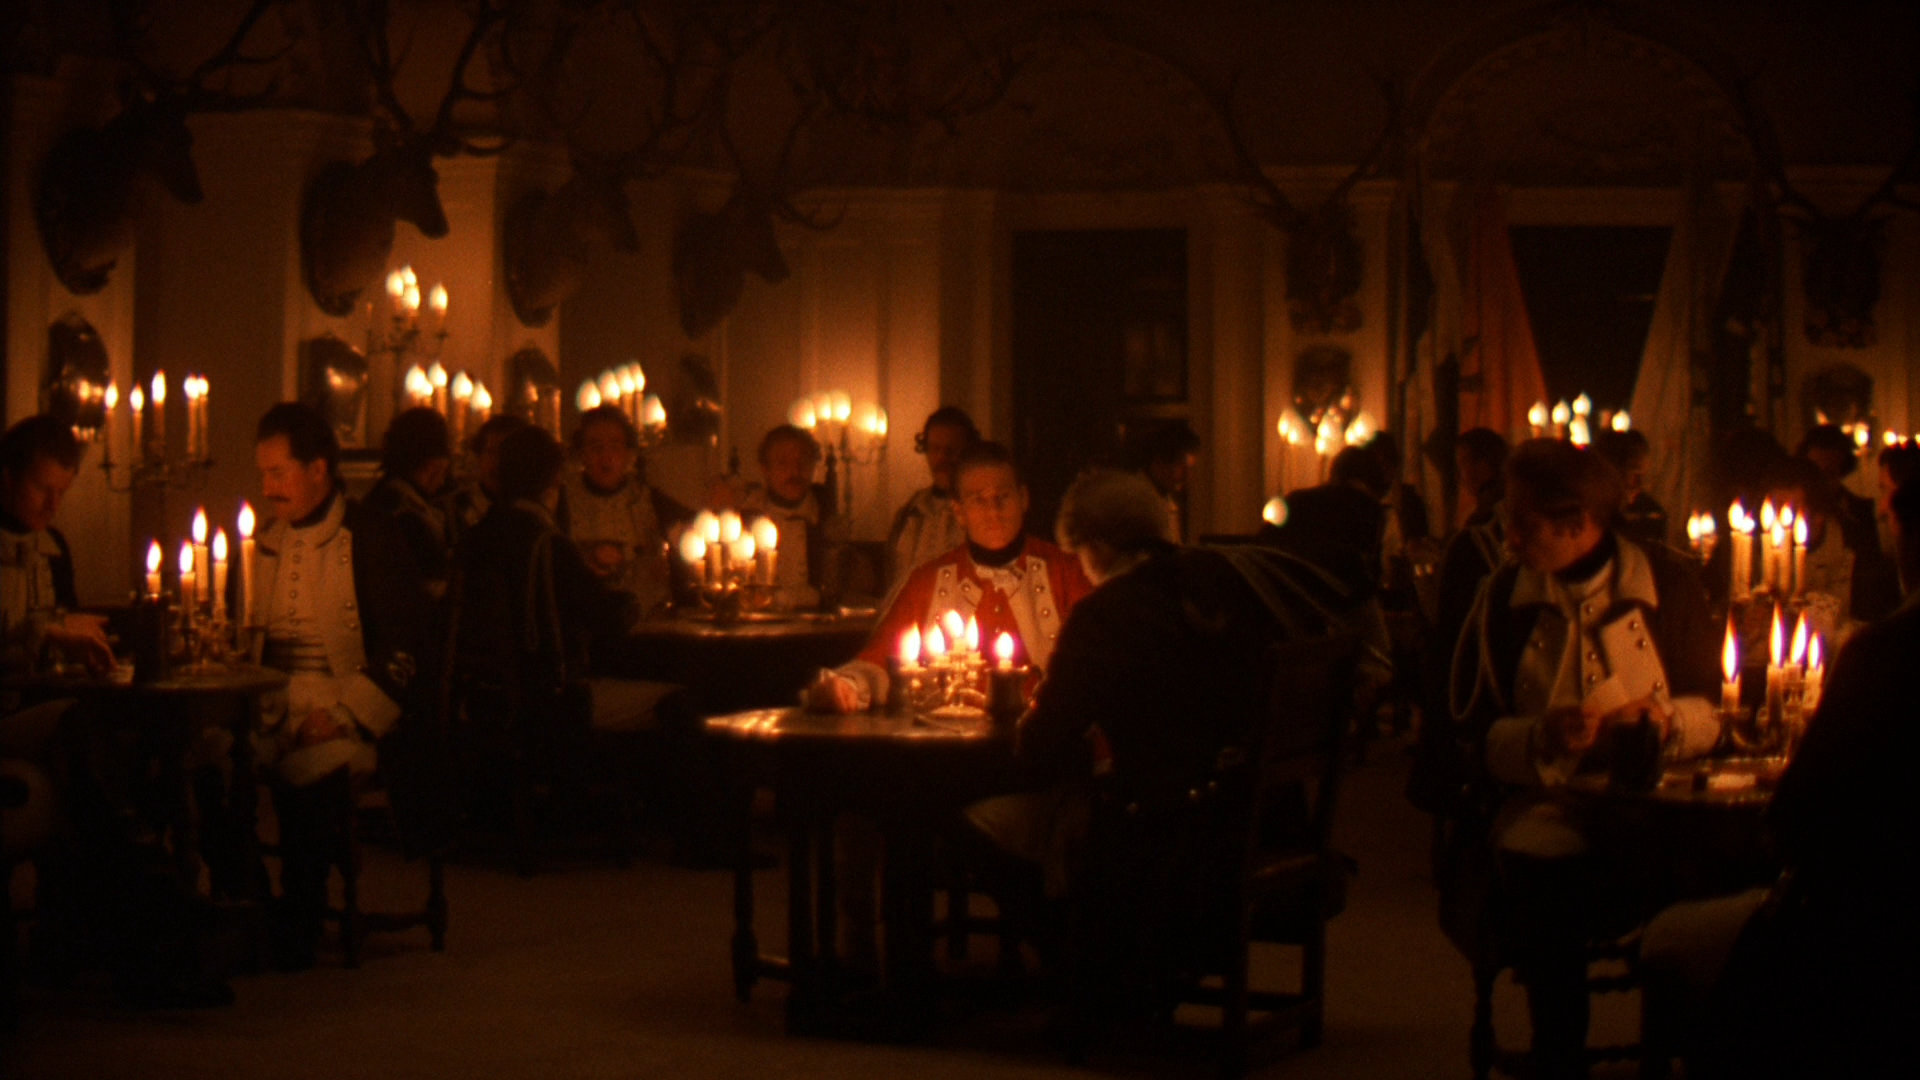 A candlelight scene from Barry Lyndon